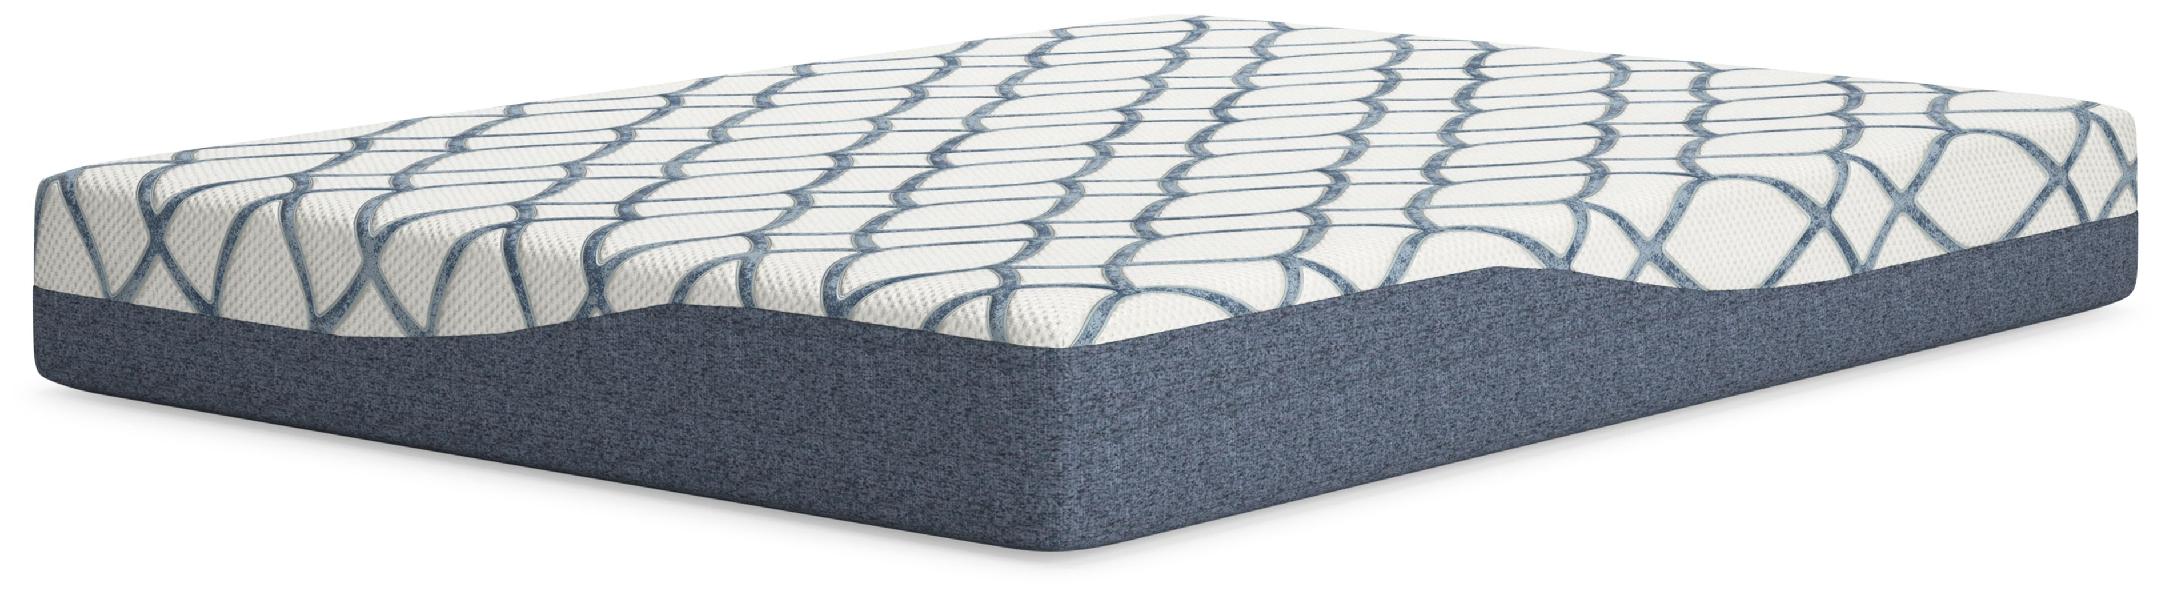 Image of 10 Inch Chime Elite 2.0 - White / Blue - Queen Mattress